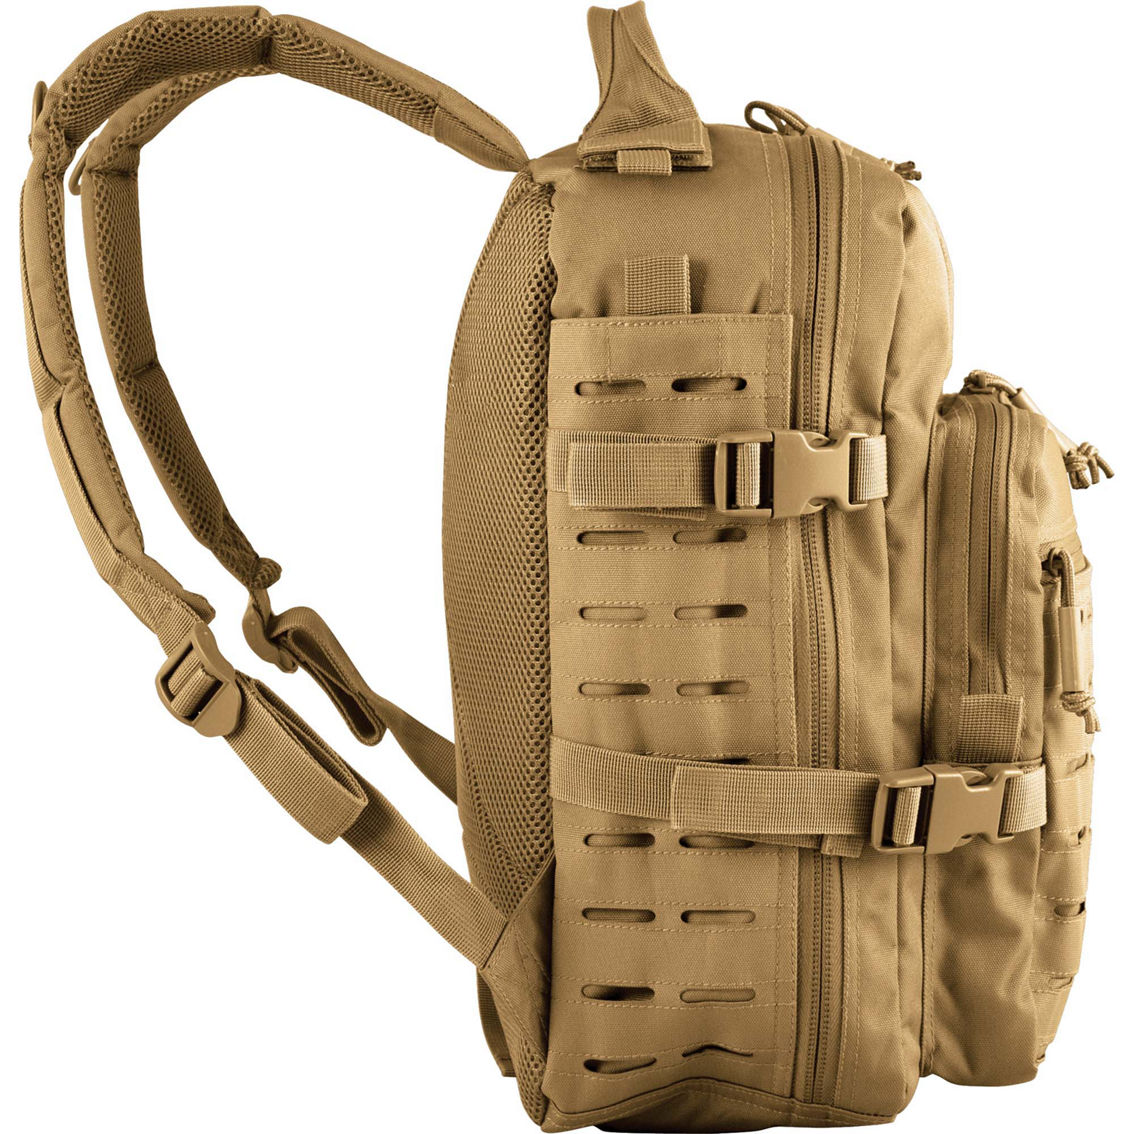 Red Rock Outdoor Gear Transporter Day Pack - Image 3 of 9